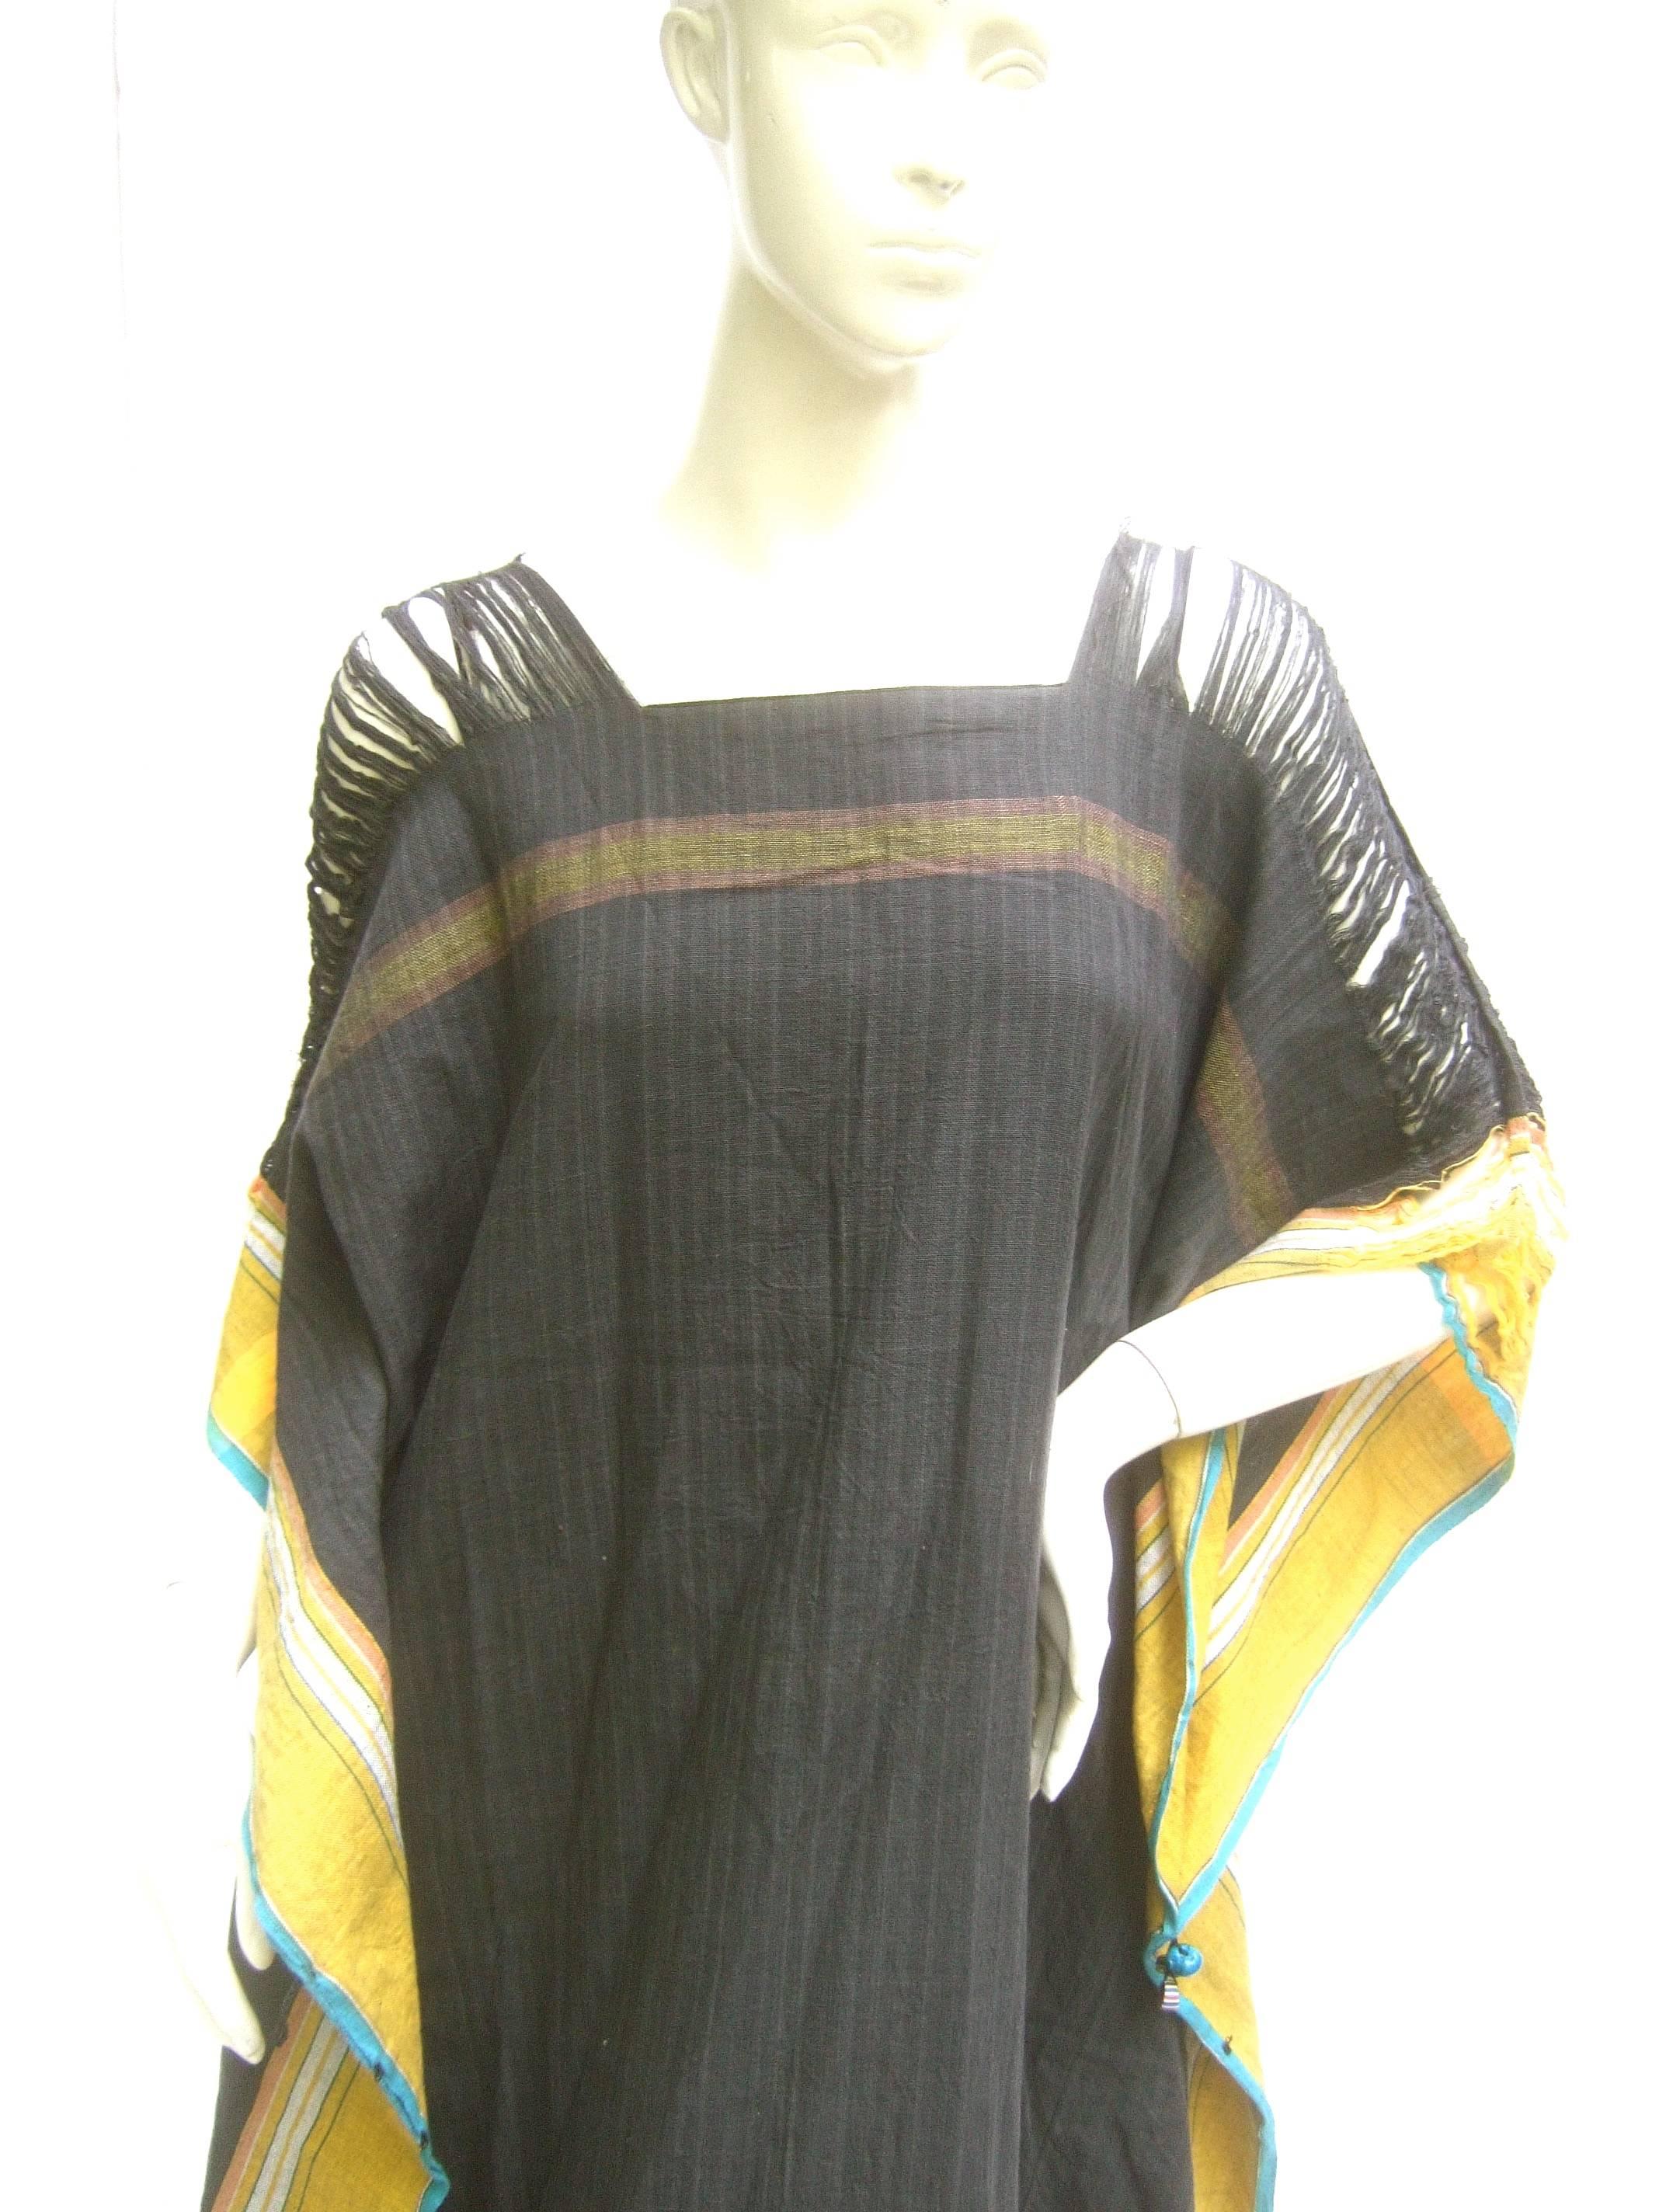 Women's South African 1970s Ethnic Cotton Caftan